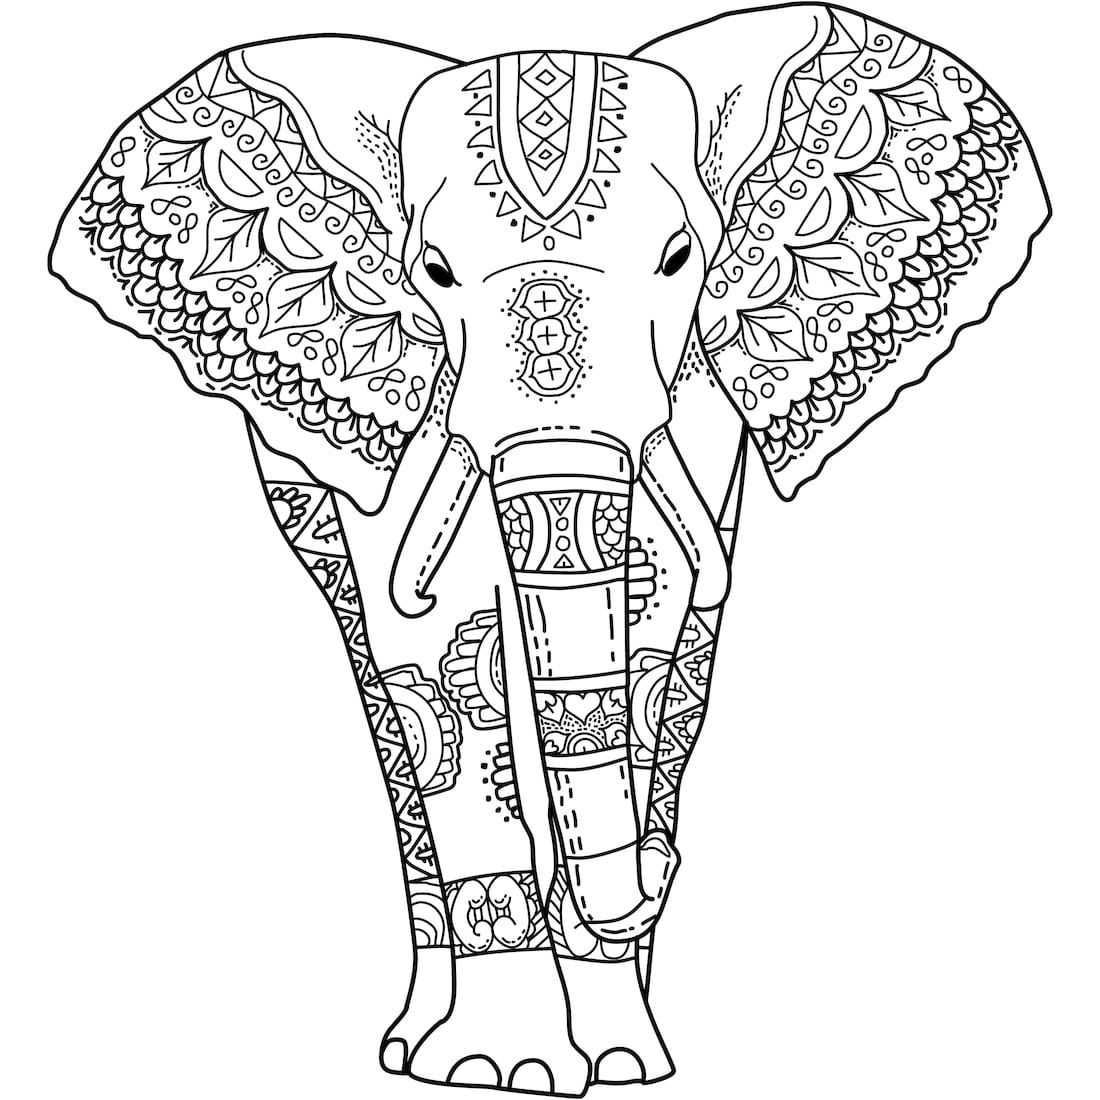 Download Elephant Coloring Pages For Adults Best Coloring Pages For Kids